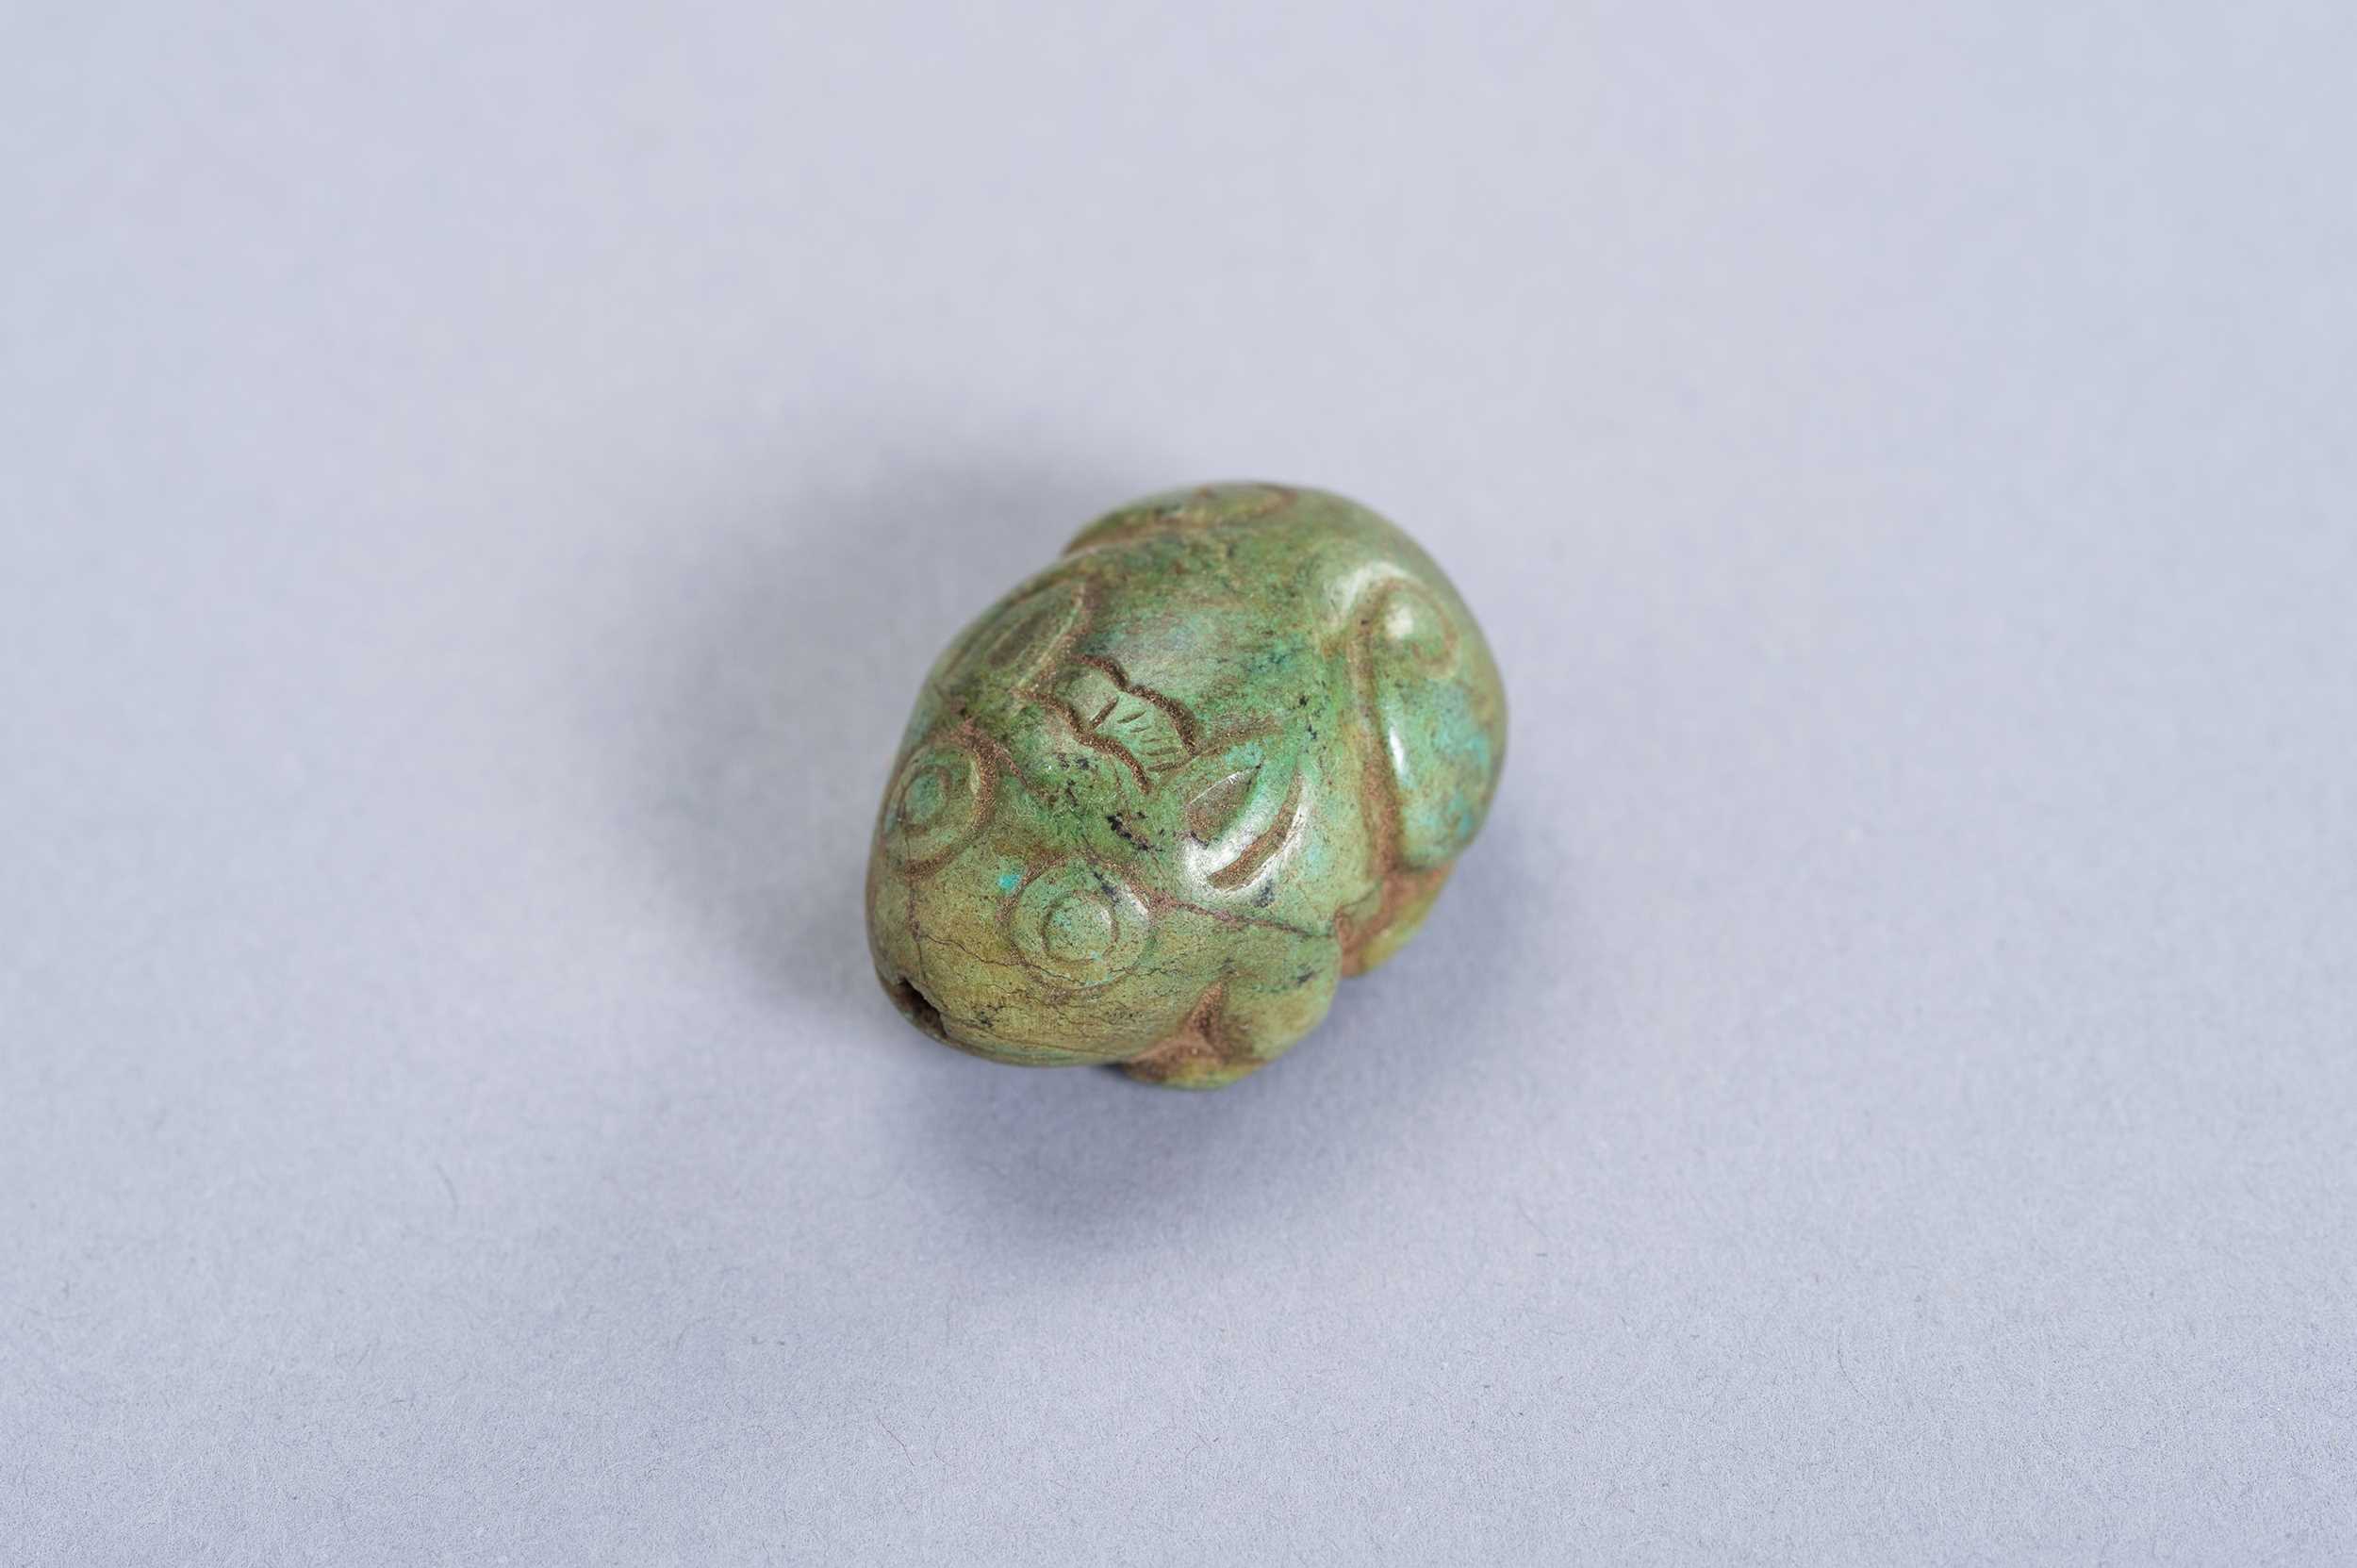 Lot 229 - A TURQUOISE PENDANT DEPICTING A HARE